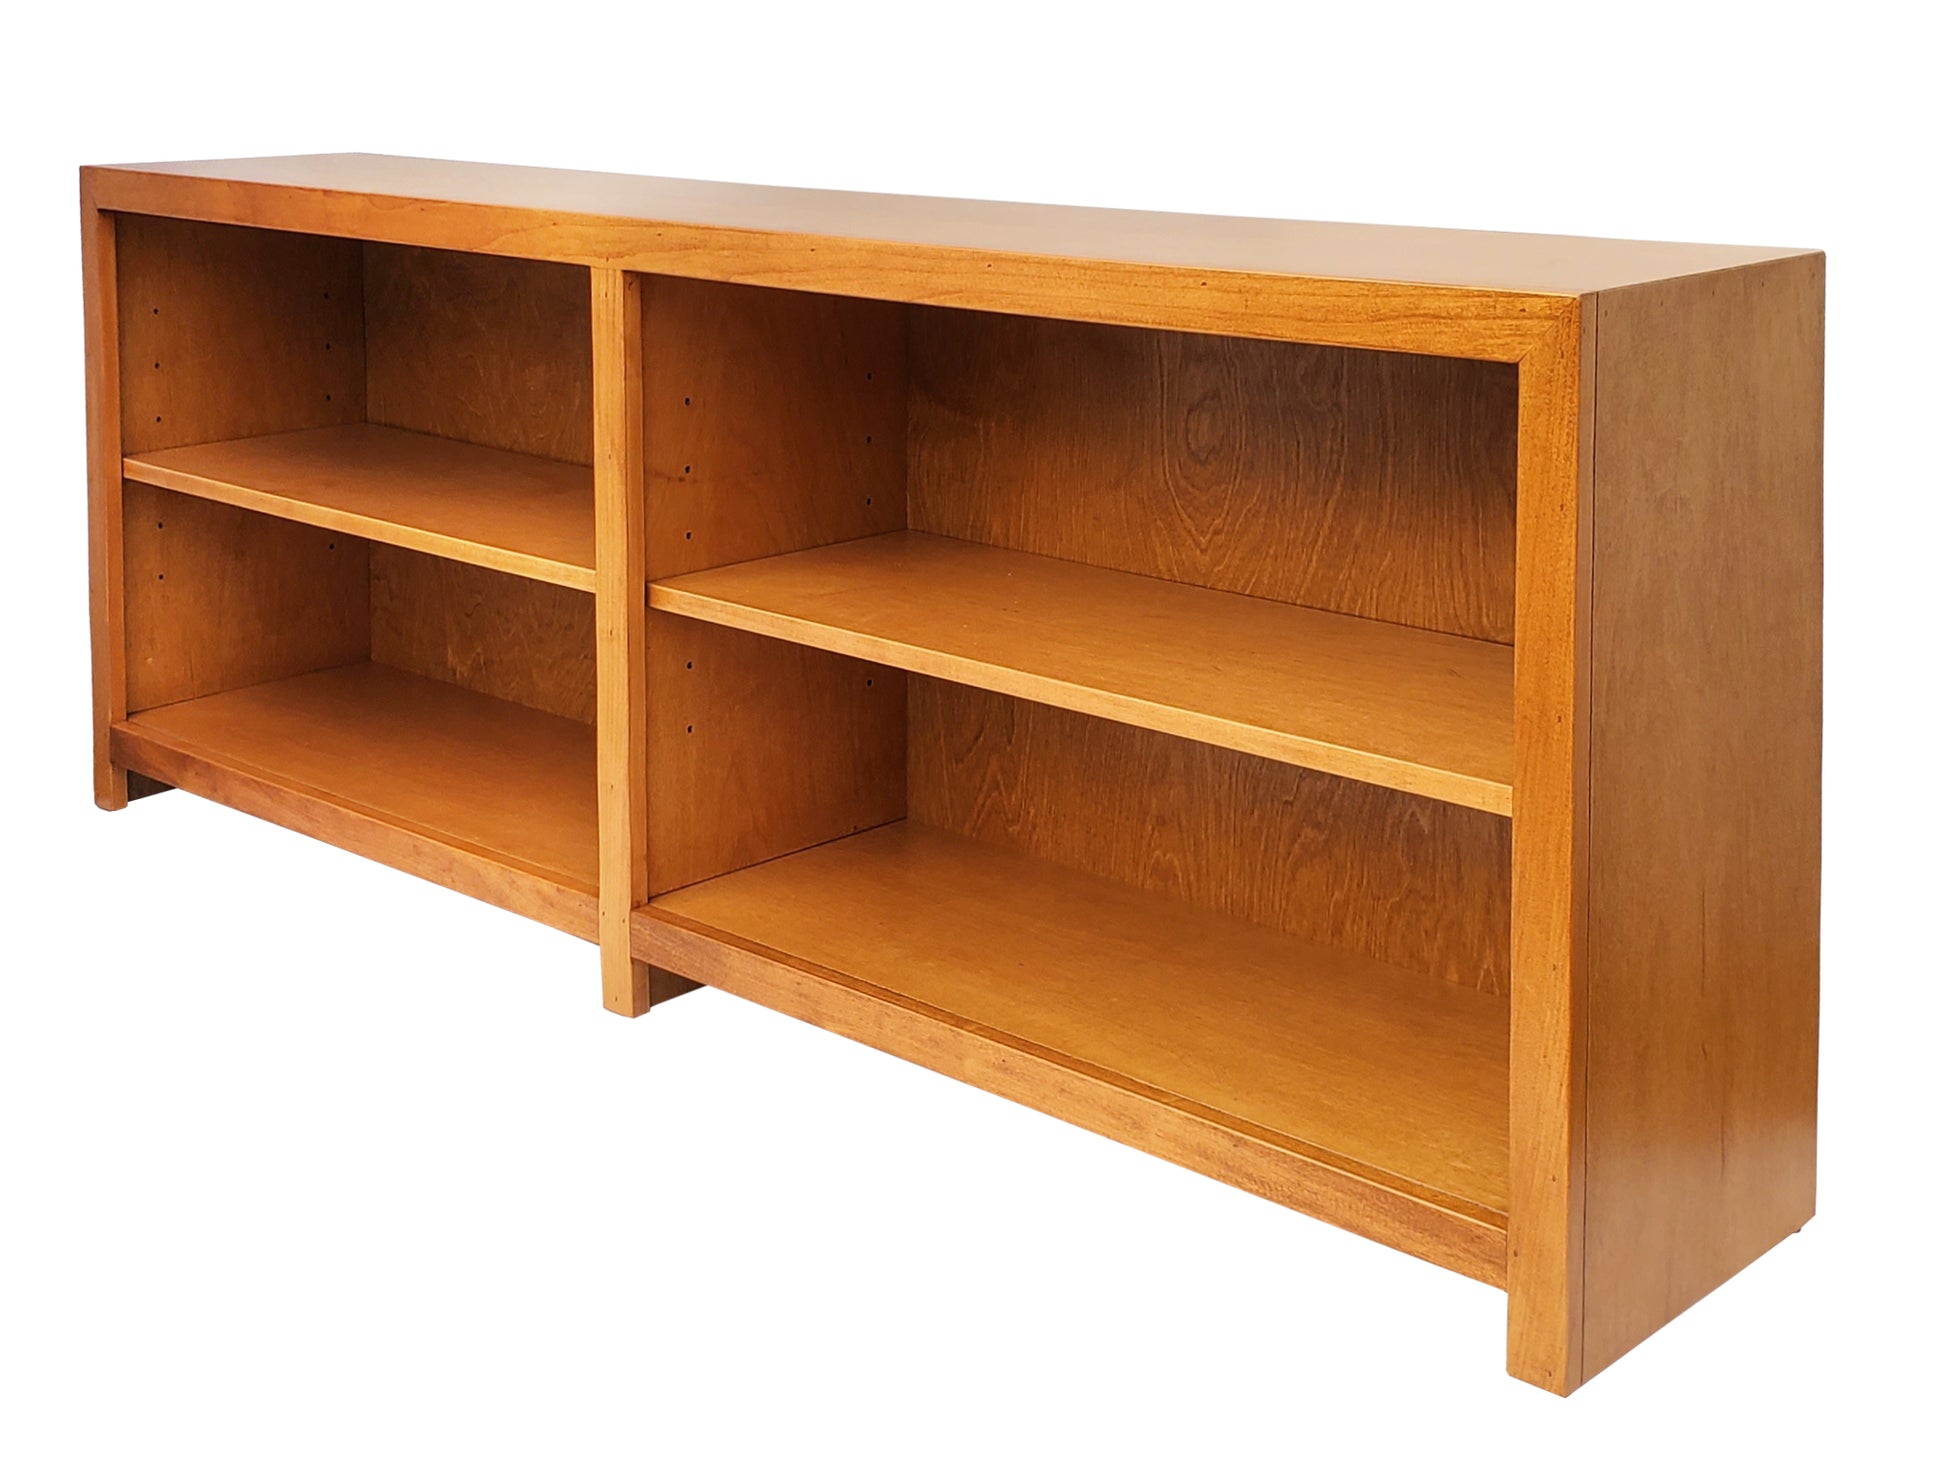 Coleman Low and Wide Bookcase, shown in salem stain, this is locally made and solid wood can also be used for TV stand